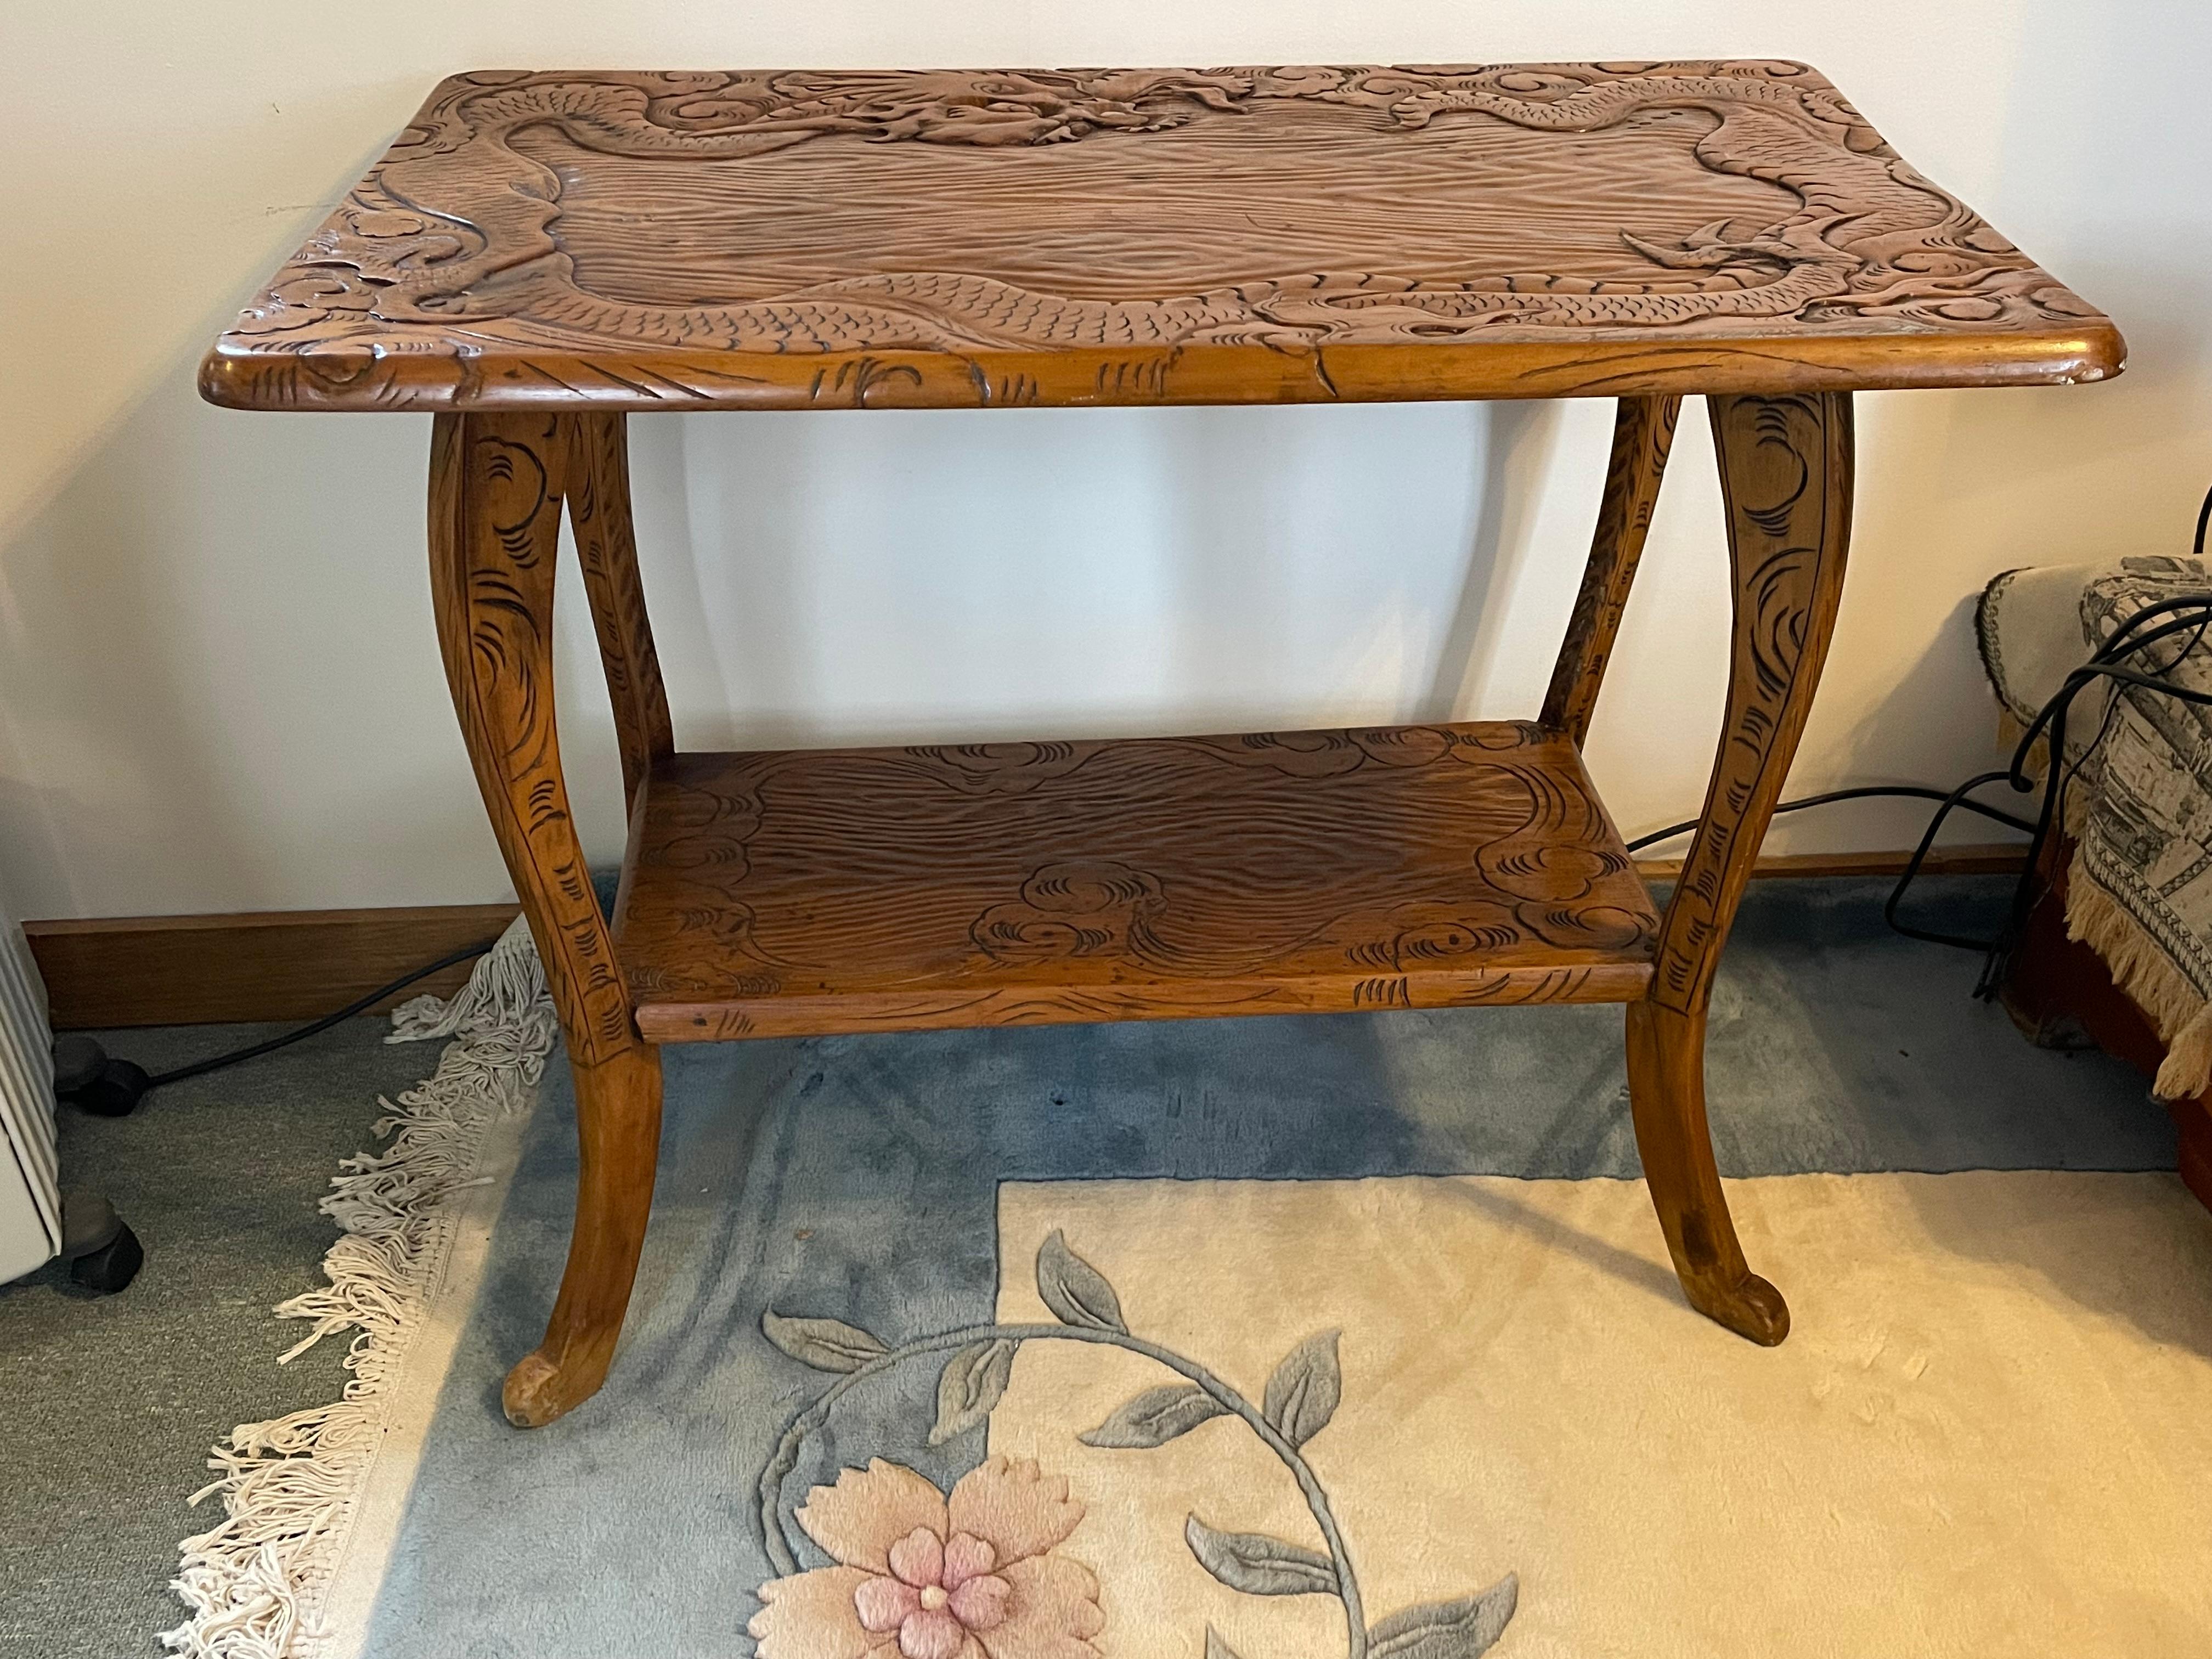 Hand-Carved Dragon Motif Cypress Wood Console or Sofa Table In Good Condition For Sale In Nantucket, MA